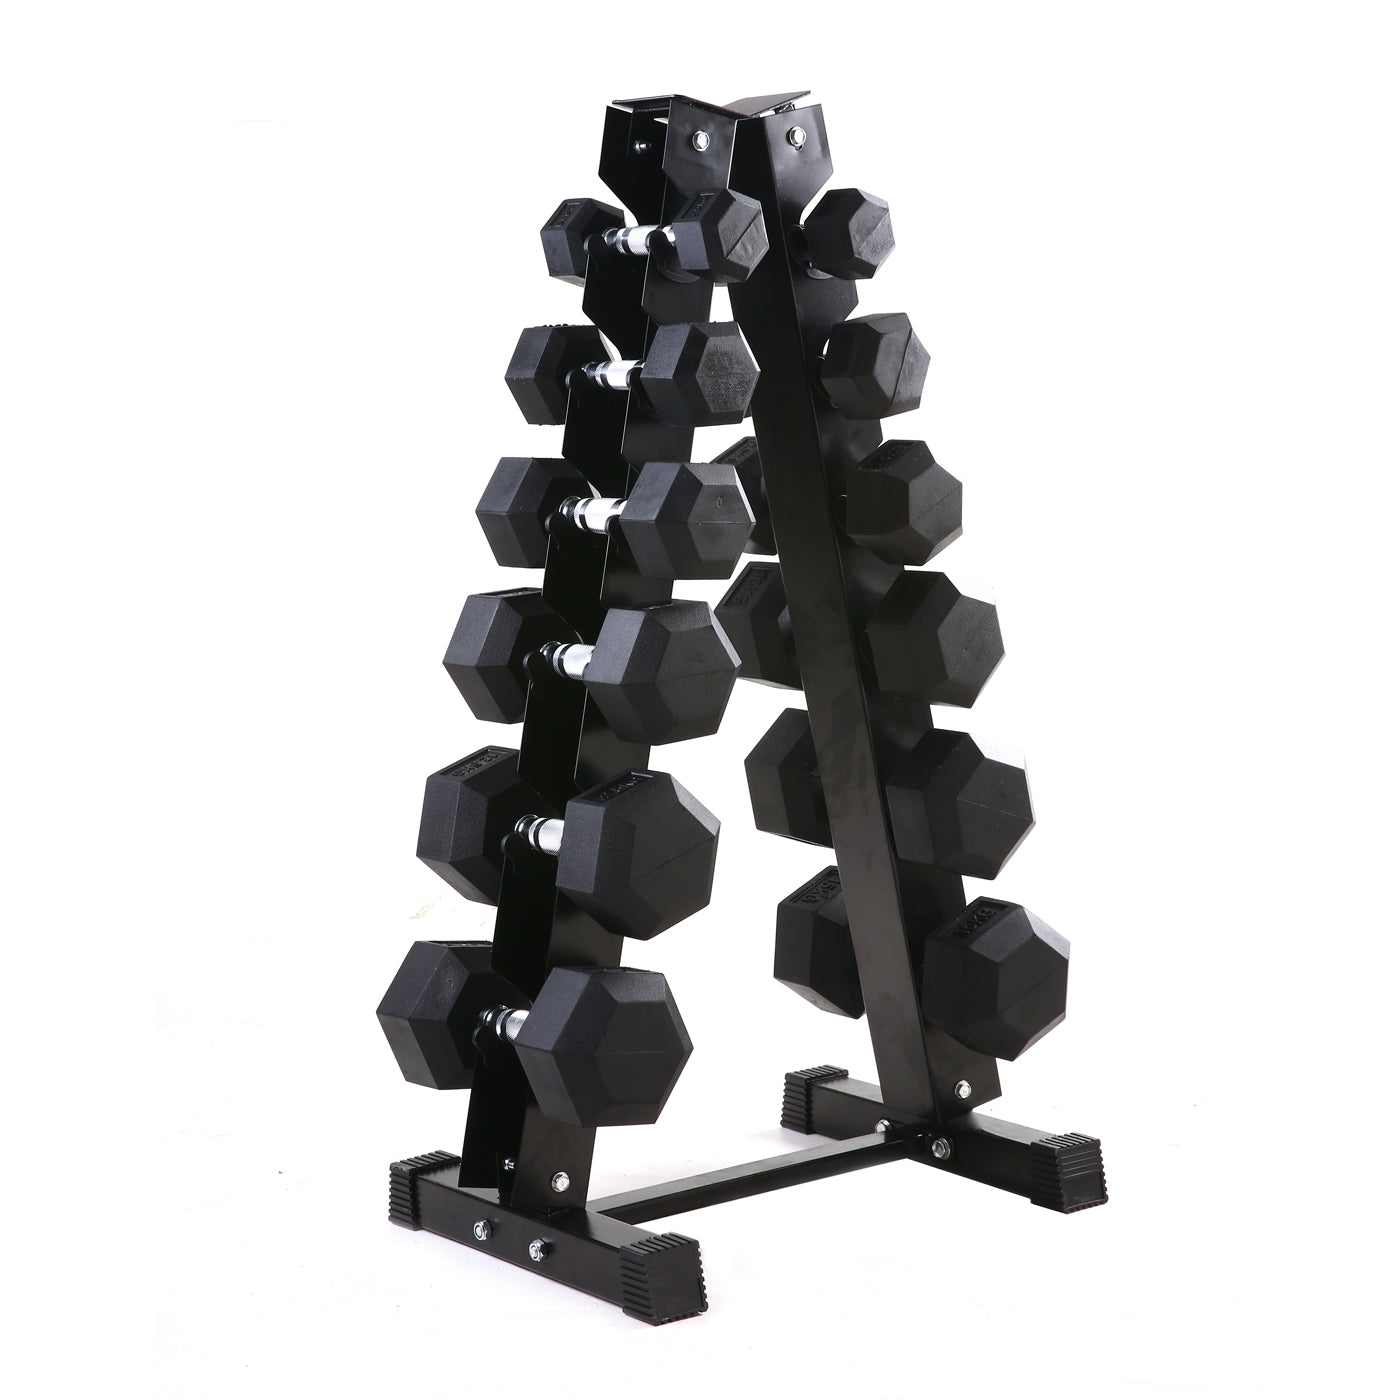 Hexagonal shape and design will prevent dumbbells from rolling away. Our premium grade hex dumbbells are an essential piece of kit for any home or commercial gym setup, our dumbbells ARE DESIGNED TO BE DROPPED! 